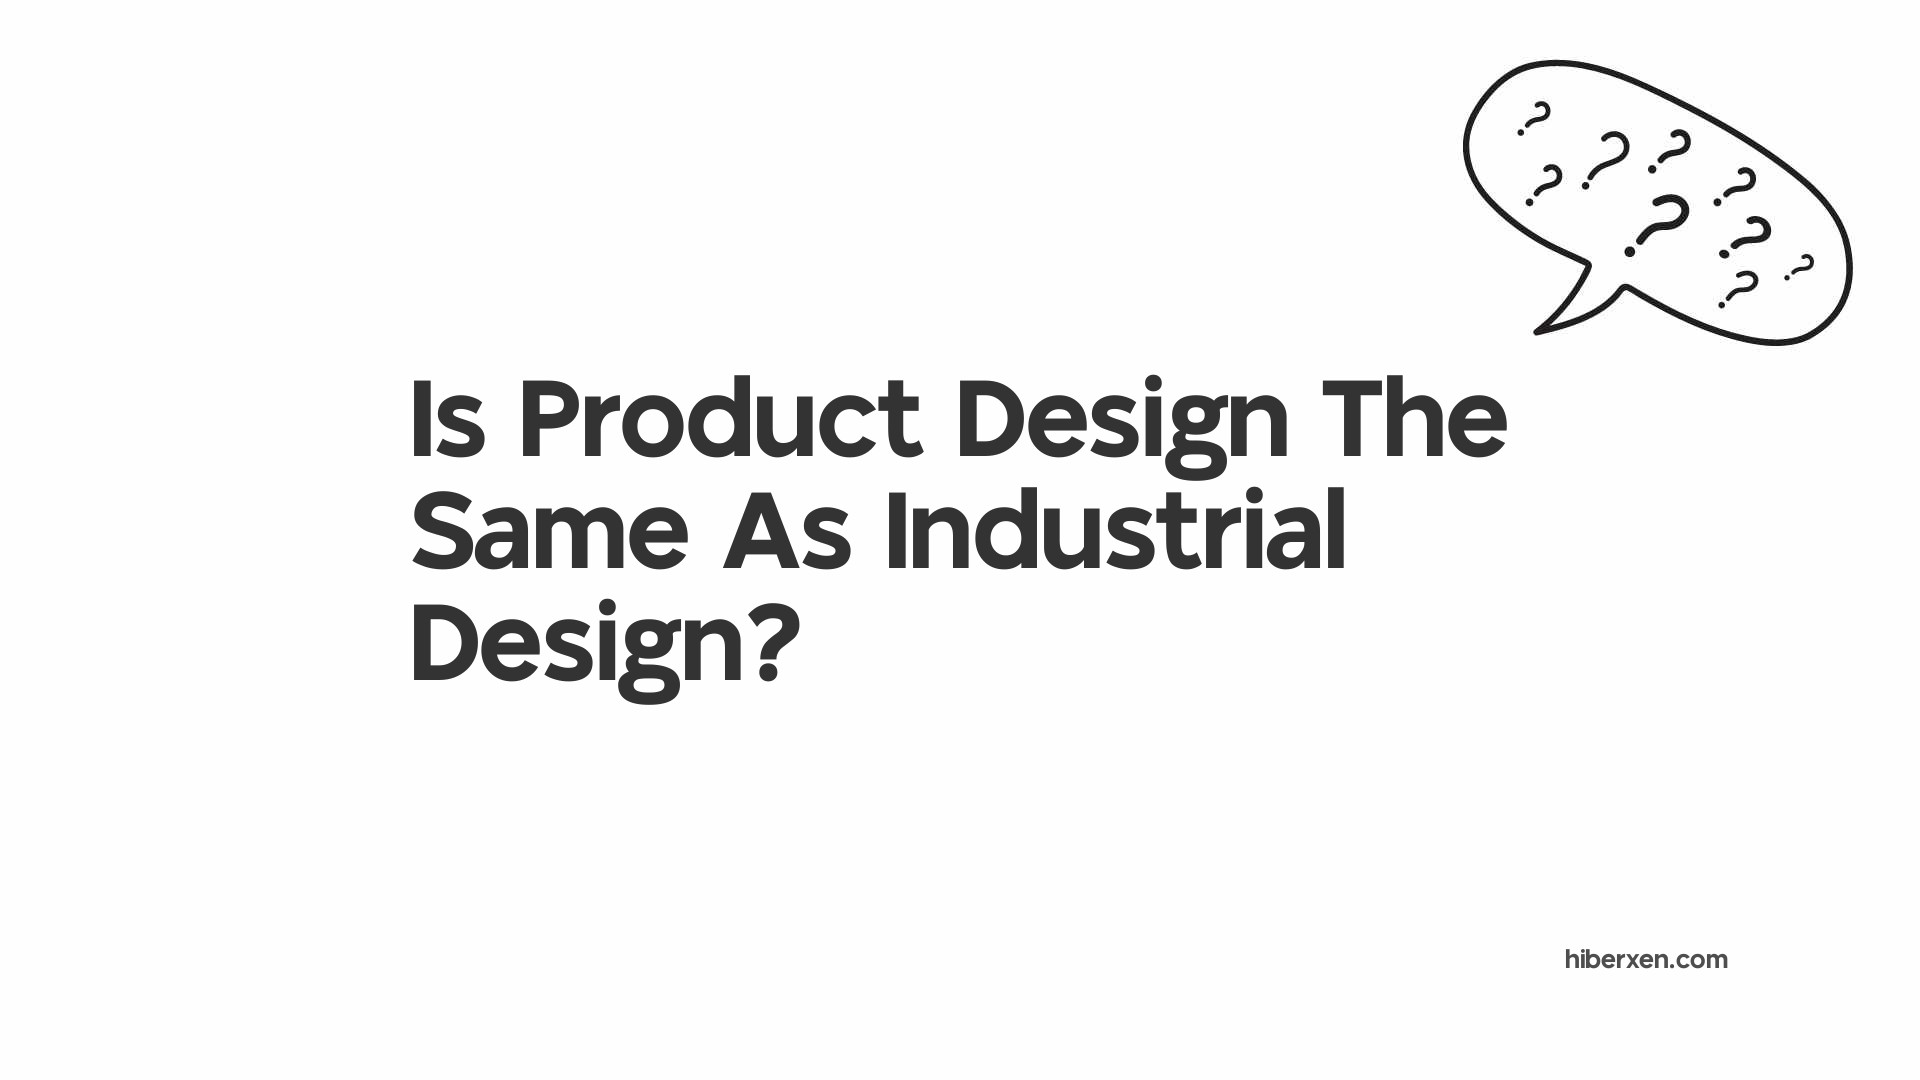 Is Product Design The Same As Industrial Design?